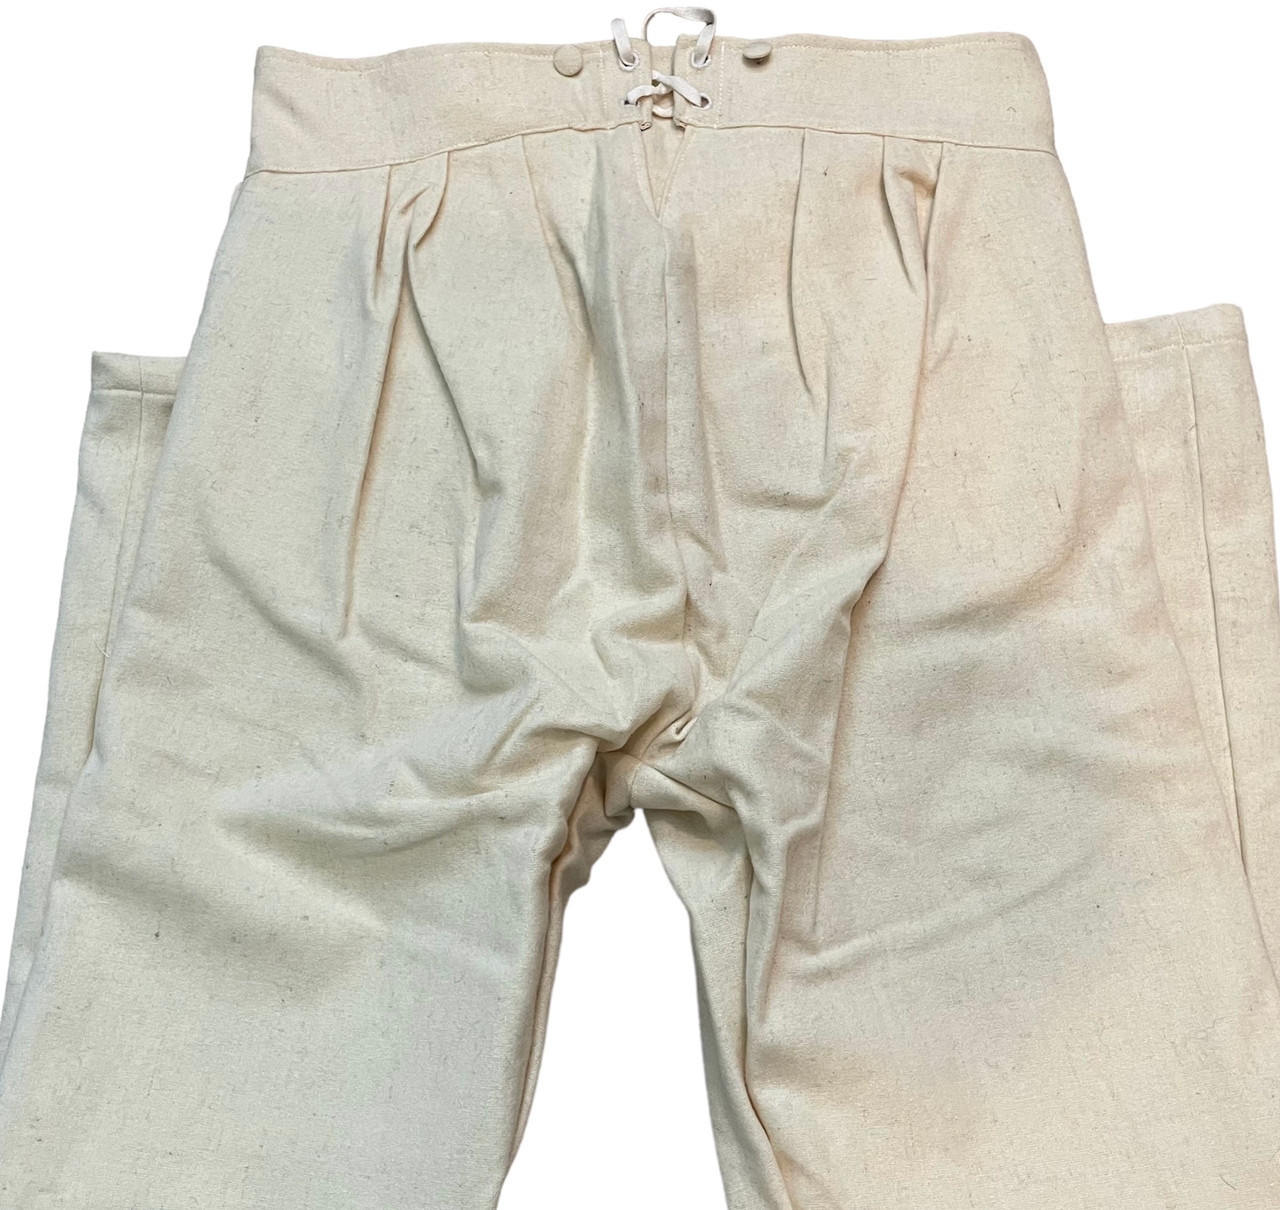 Early 19th Century Trousers WITH SIDE SEAM POCKETS - South Union Mills